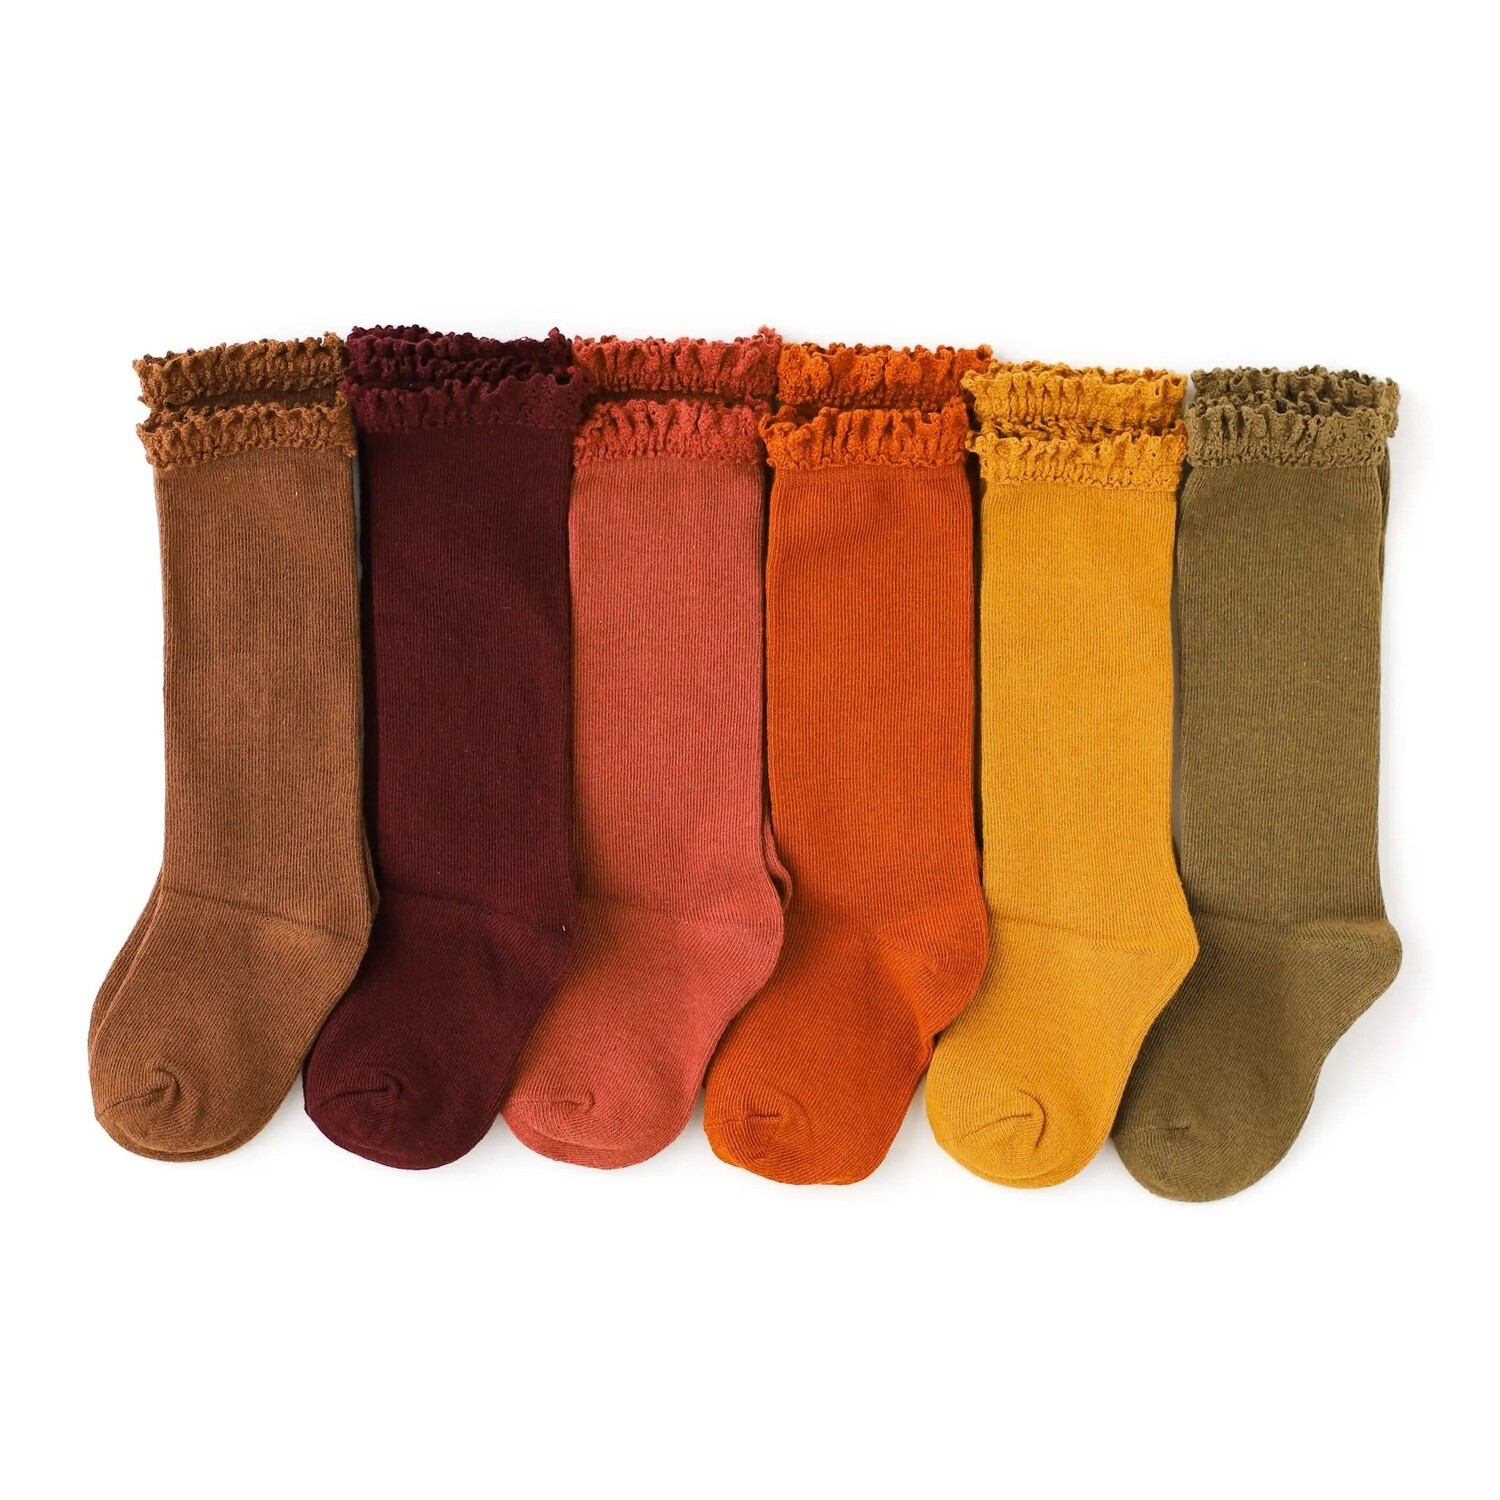 Little Stocking Fall Lace Top Socks*